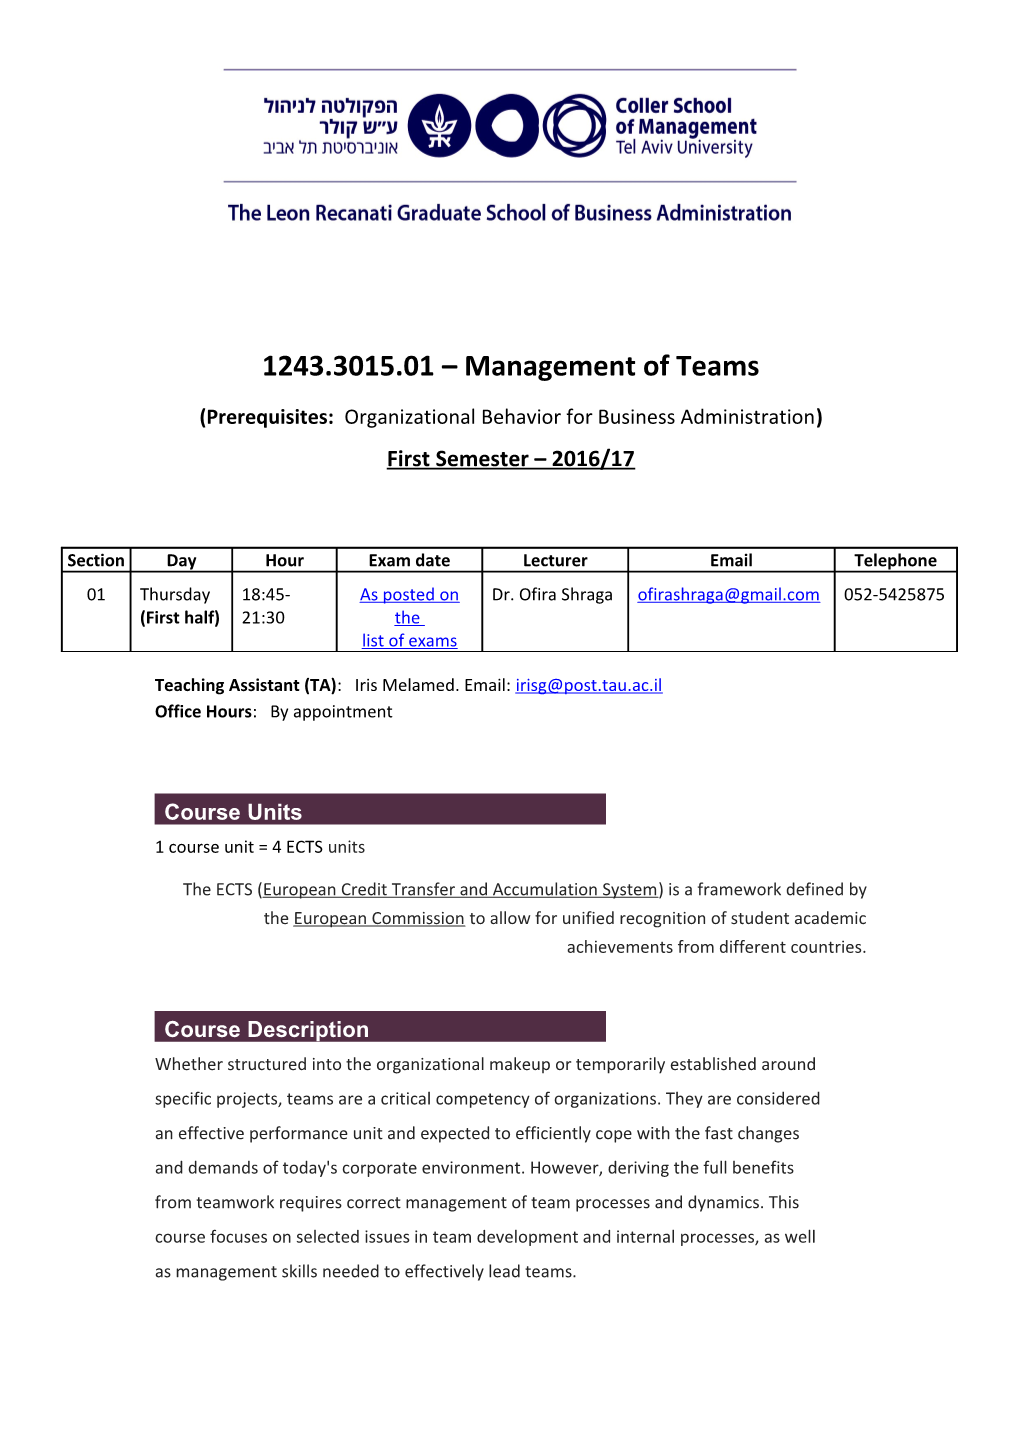 1243.3015.01 Management of Teams